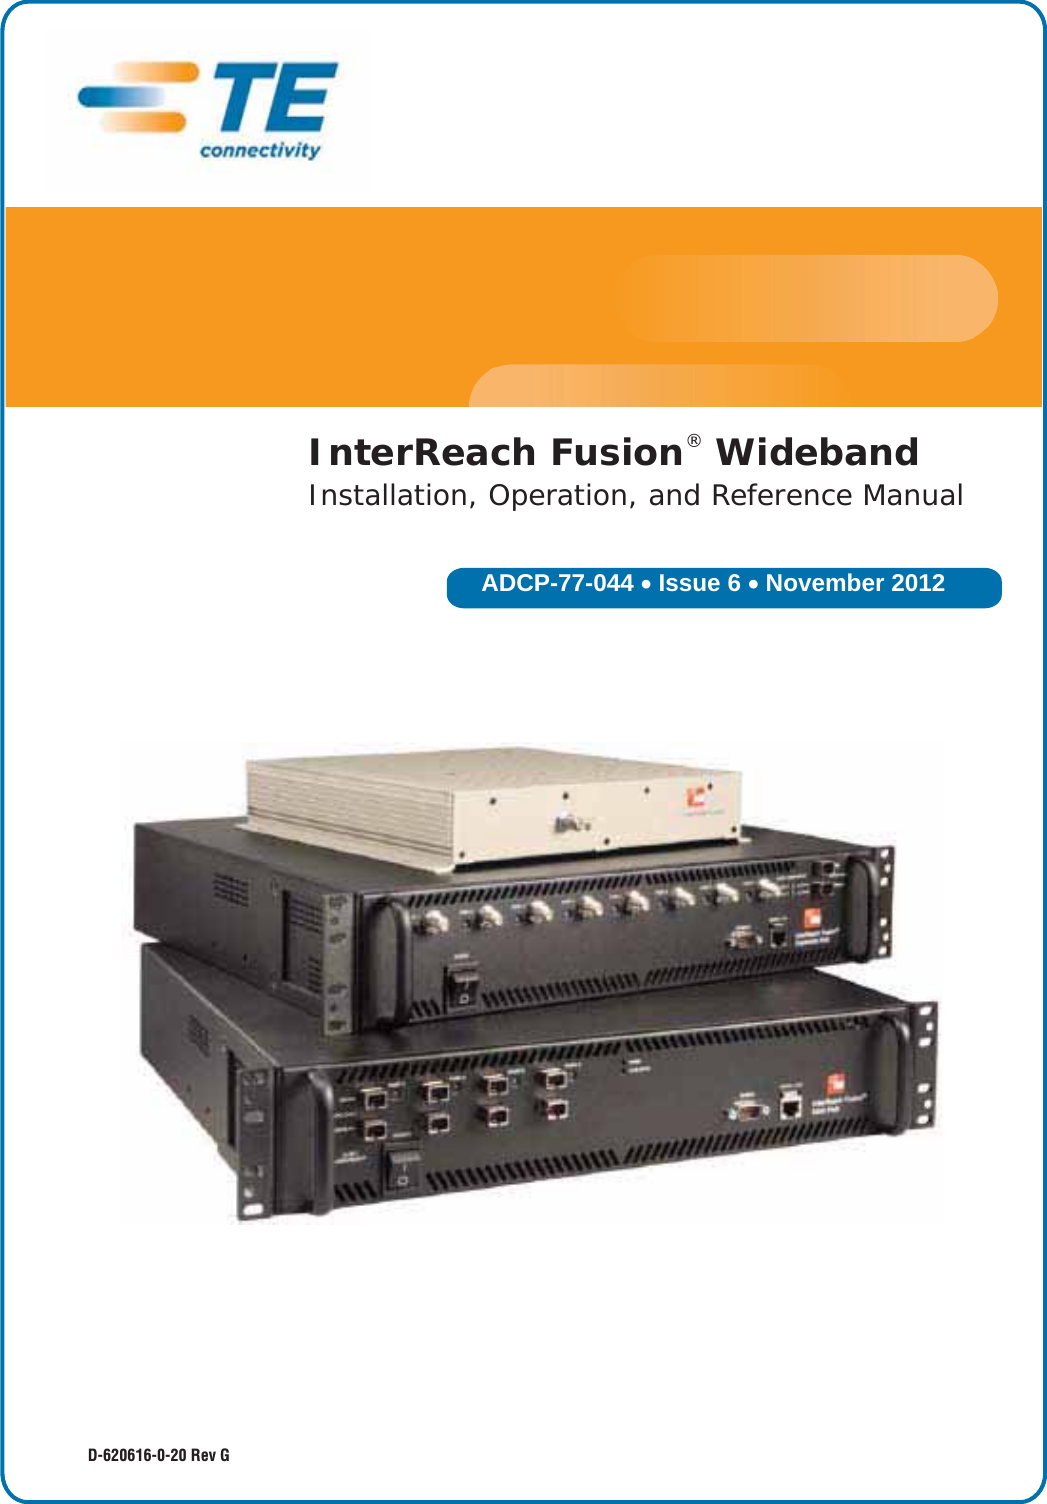 ADCP-77-044 x Issue 6 x November 2012D-620616-0-20 Rev GInterReach Fusion® WidebandInstallation, Operation, and Reference Manual